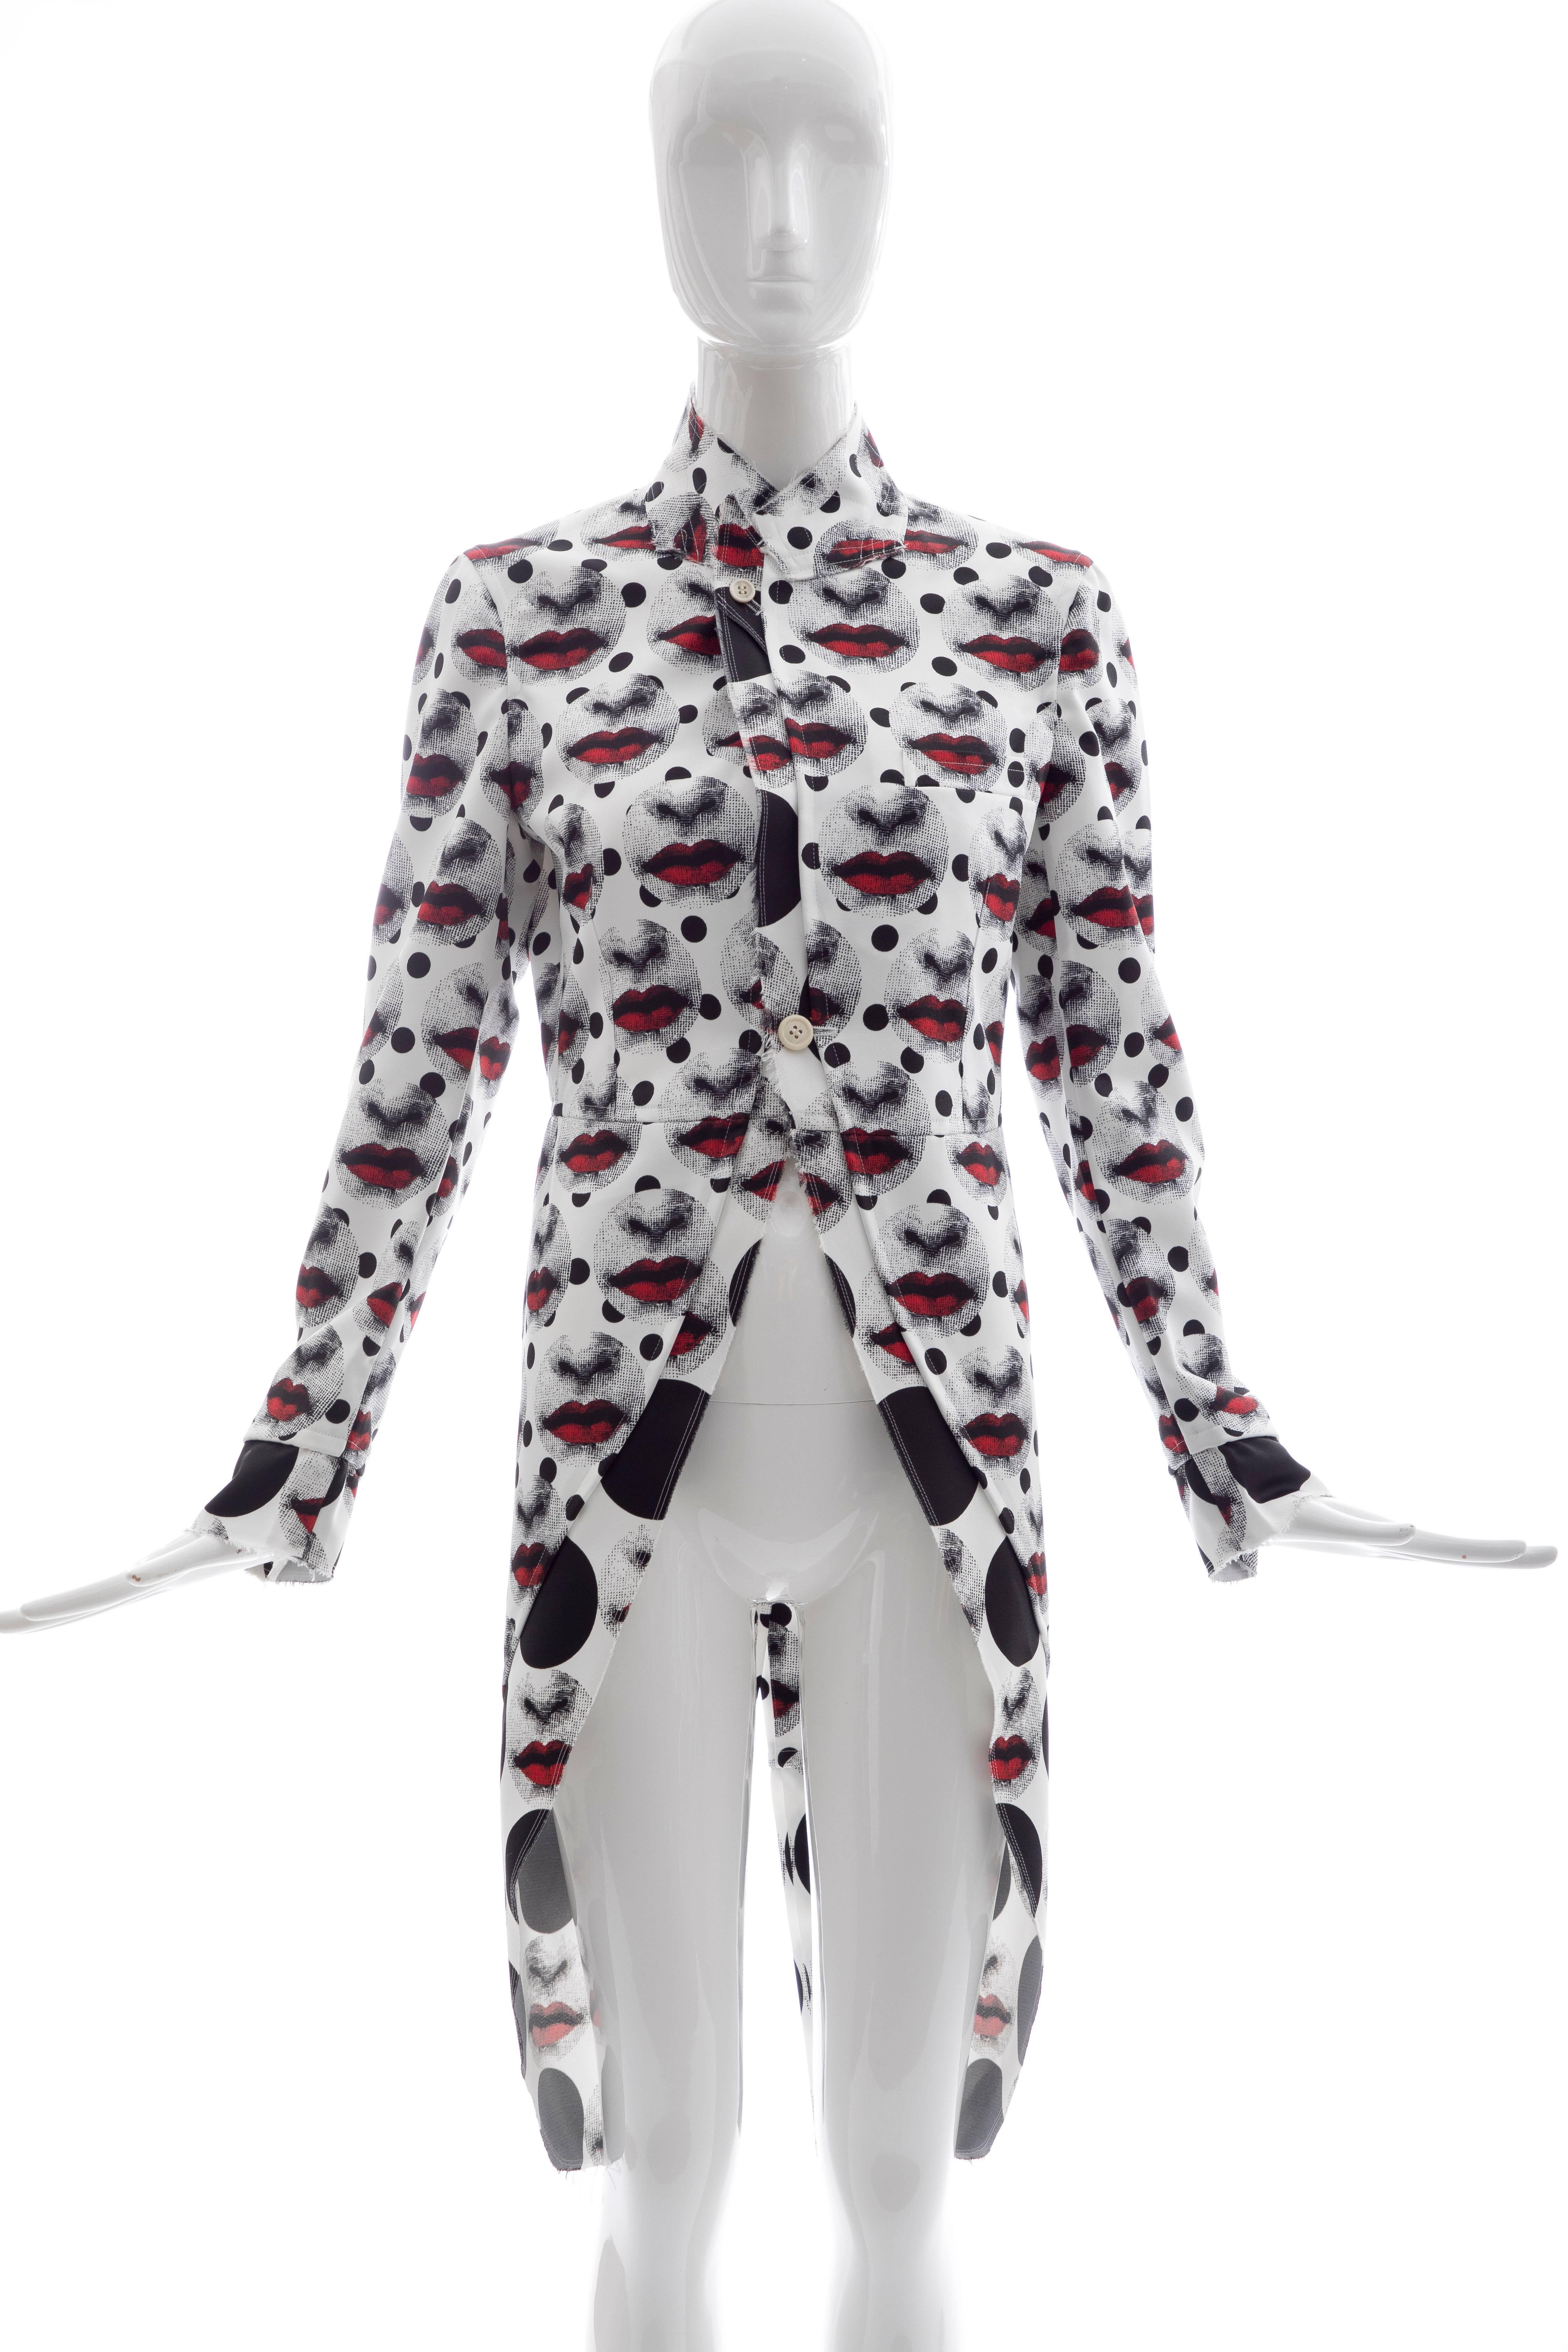 Comme des Garçons Homme Plus, Spring 2017 runway (Look 16) printed Fornasetti jacket with raw-edge hems and single button closure at center front.

Japan: Small
Bust: 34, Waist 29.5, Shoulder 14.75, Length 41, Sleeve 28.5
